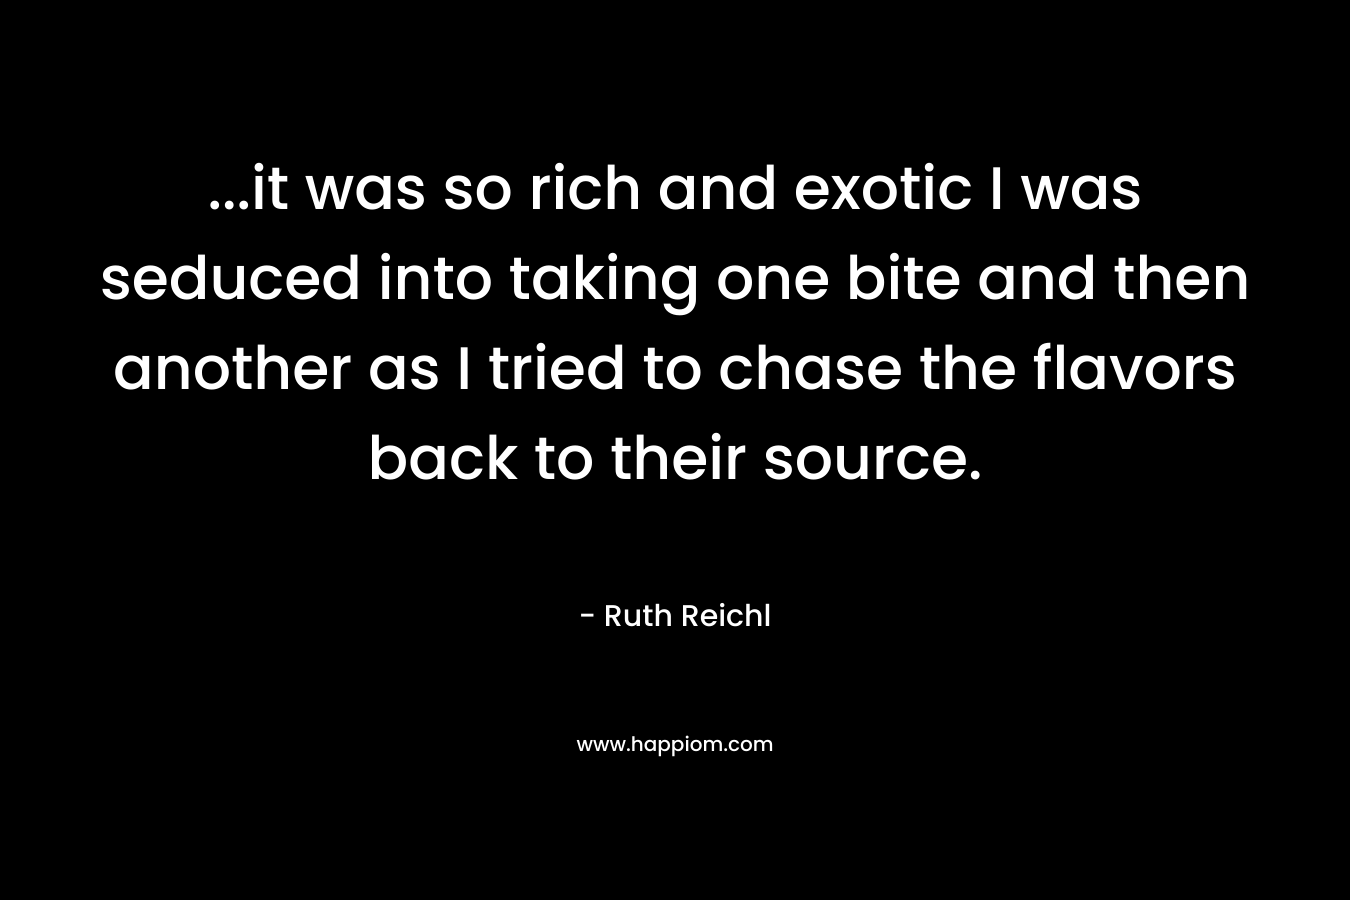 …it was so rich and exotic I was seduced into taking one bite and then another as I tried to chase the flavors back to their source. – Ruth Reichl